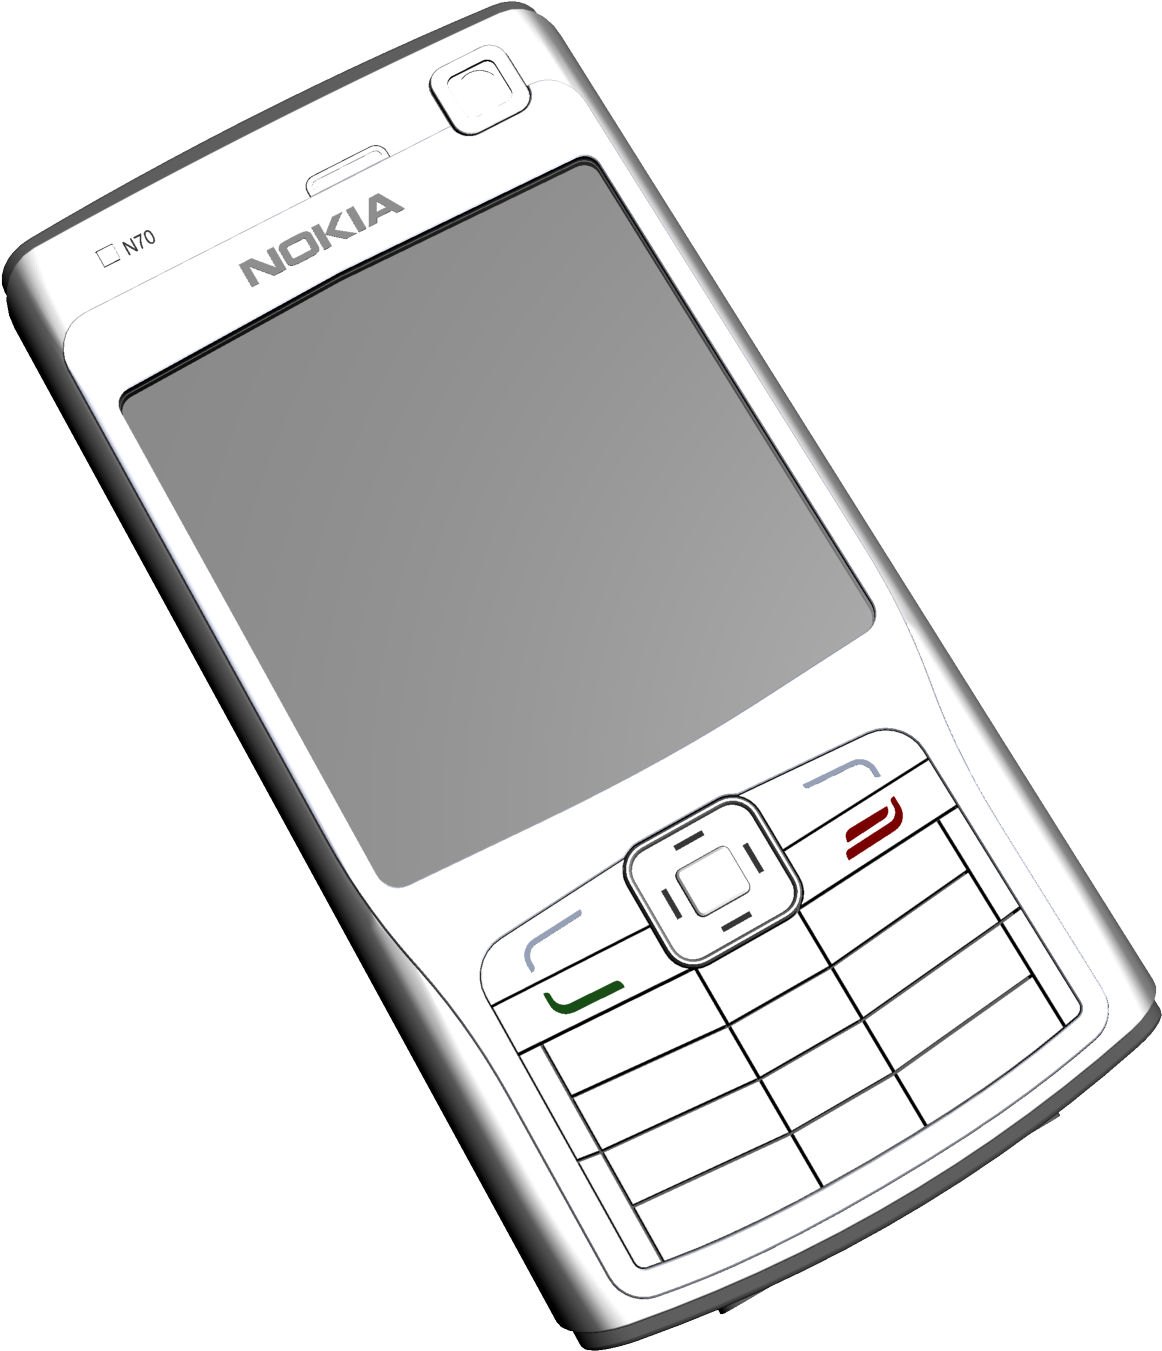 Nokia N70 Classic Phone Clipart PNG